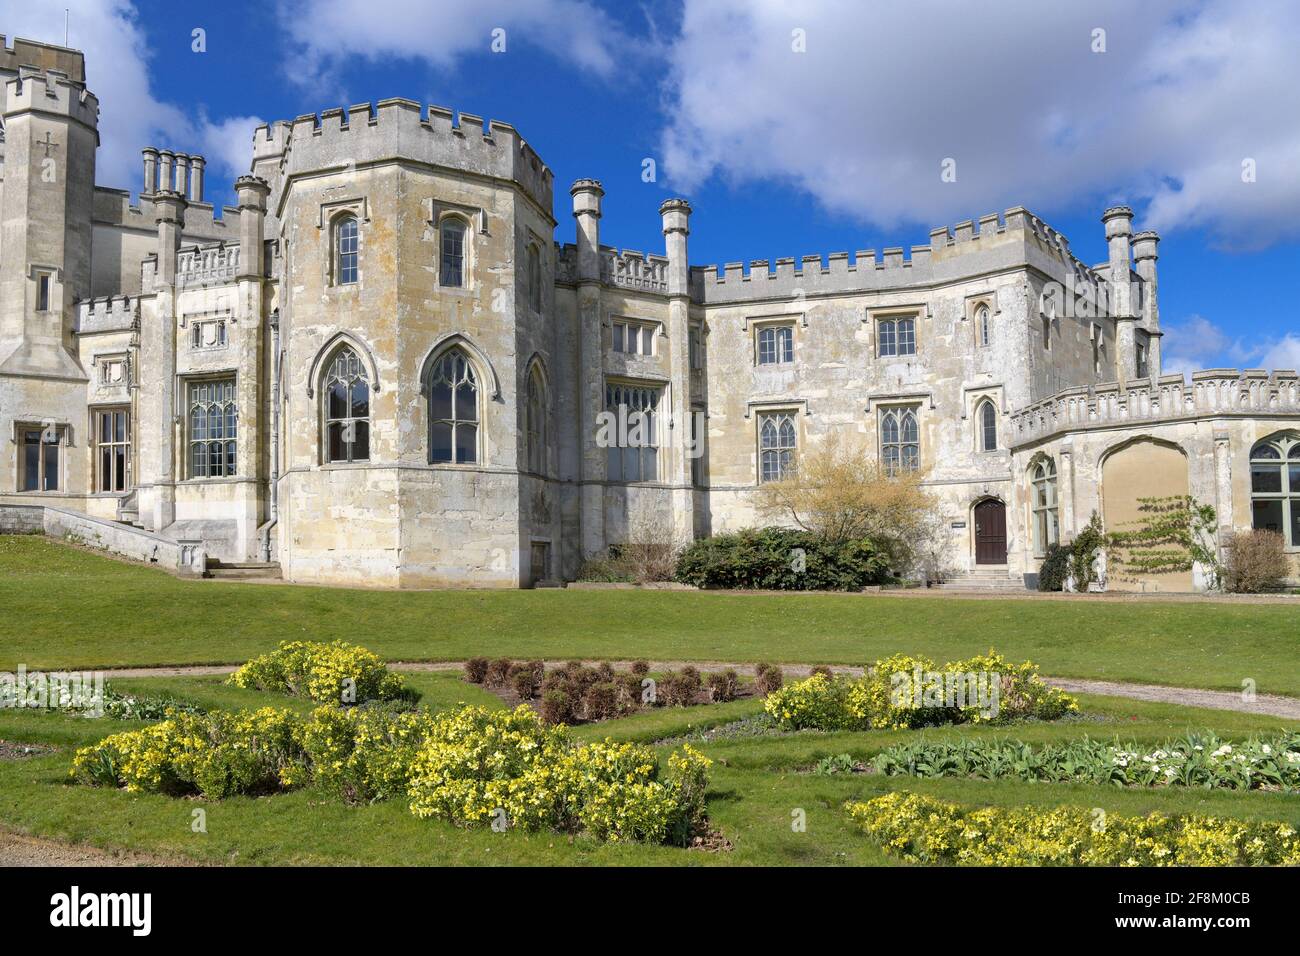 North WiNG Ashridge House 700 ans d'histoire Hertfordshire Angleterre Banque D'Images